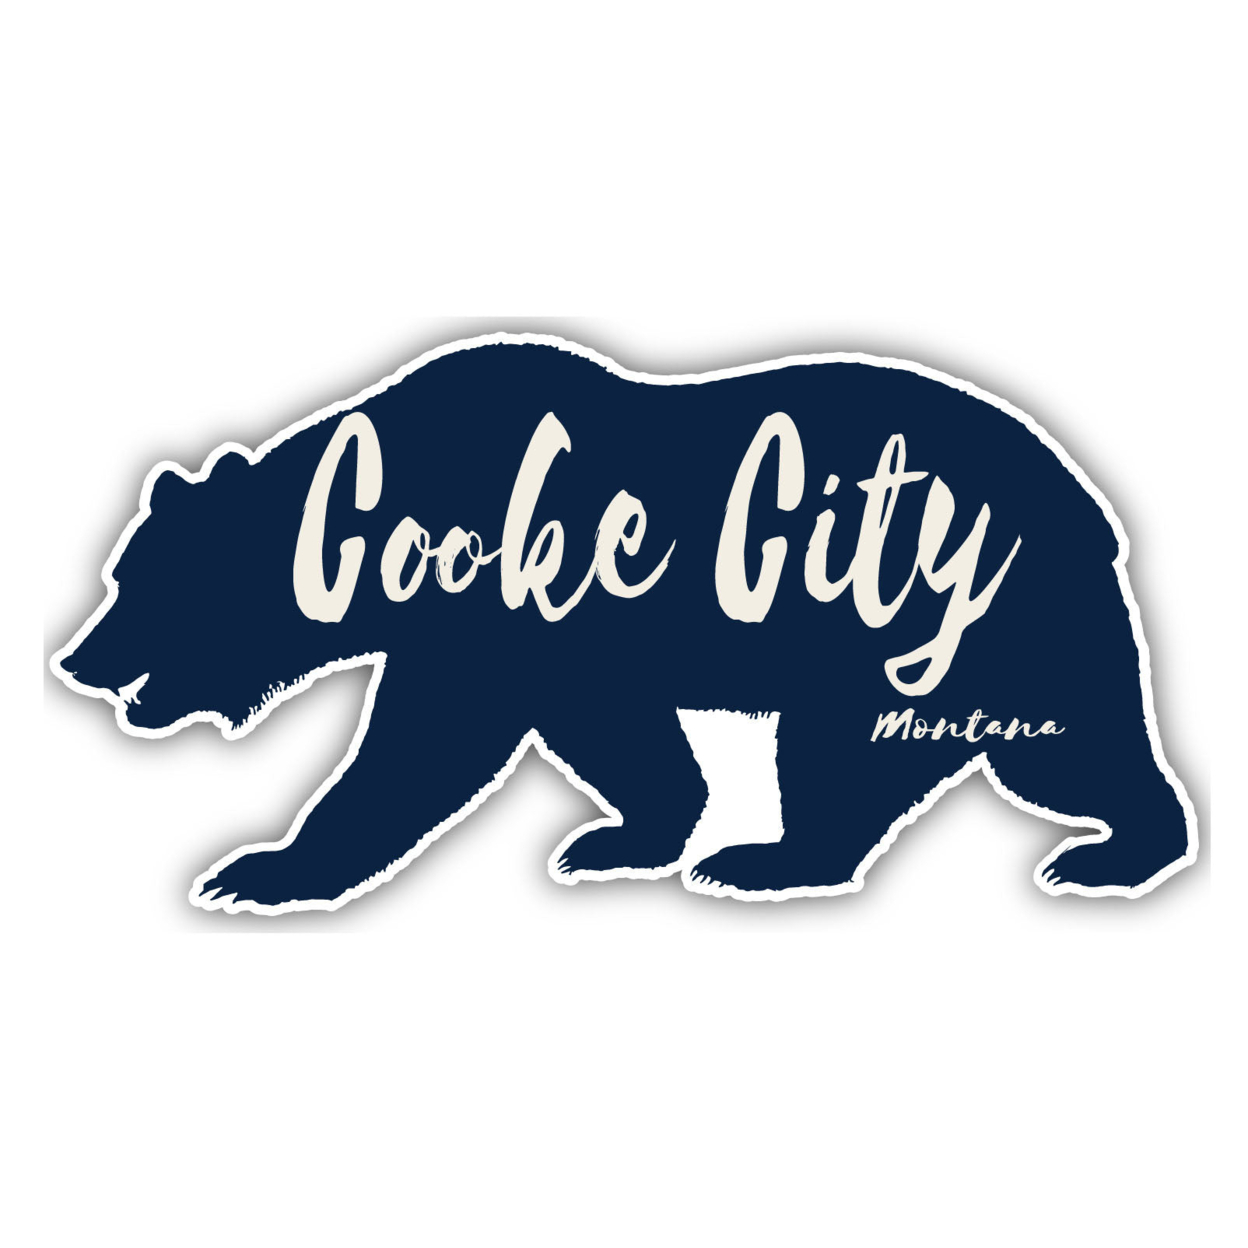 Cooke City Montana Souvenir Decorative Stickers (Choose Theme And Size) - Single Unit, 8-Inch, Great Outdoors